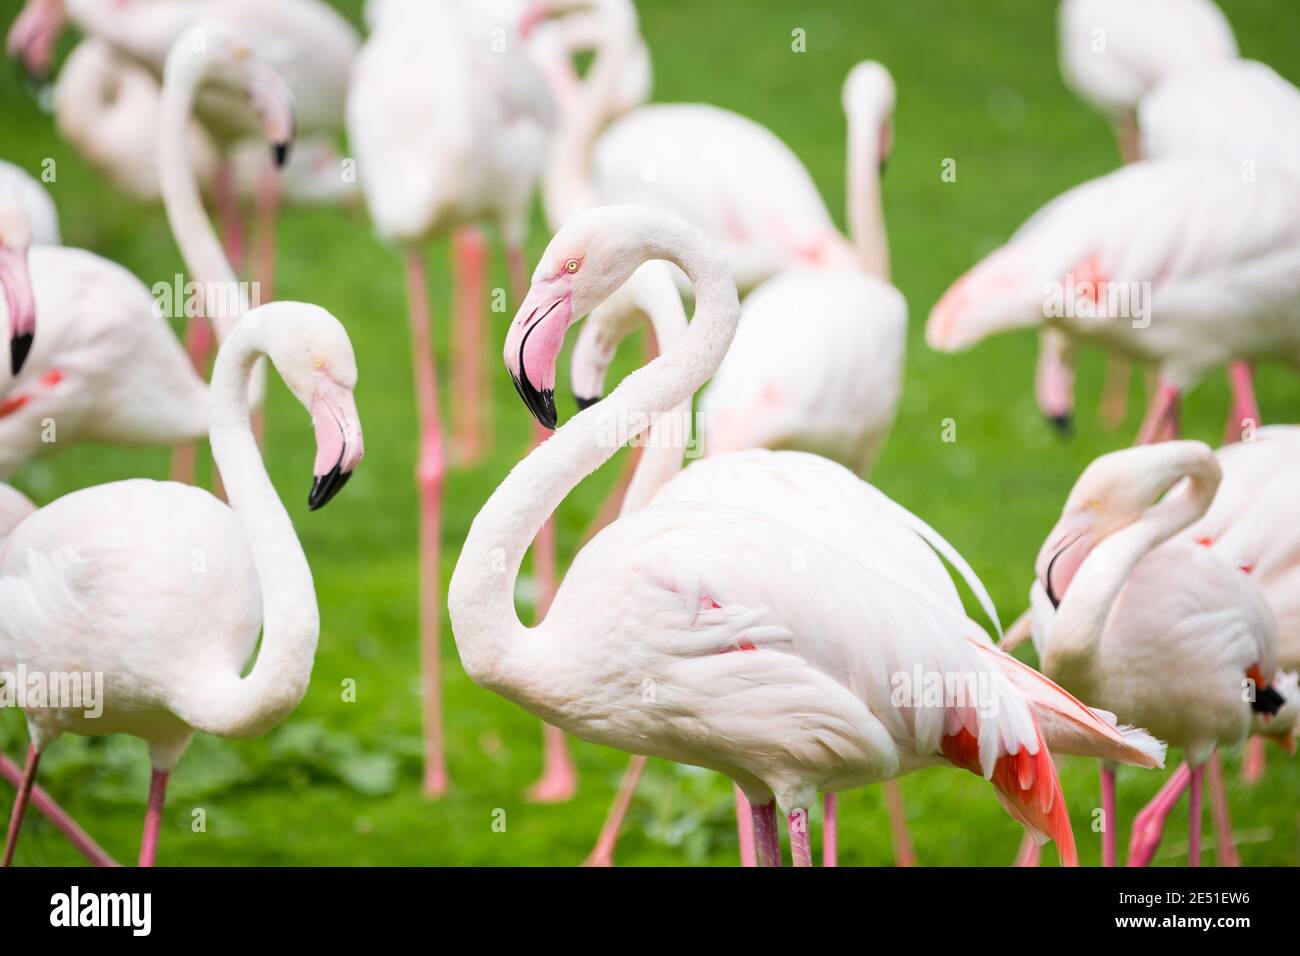 Close up of a pat of pink flamingos resting on a meadow Stock Photo